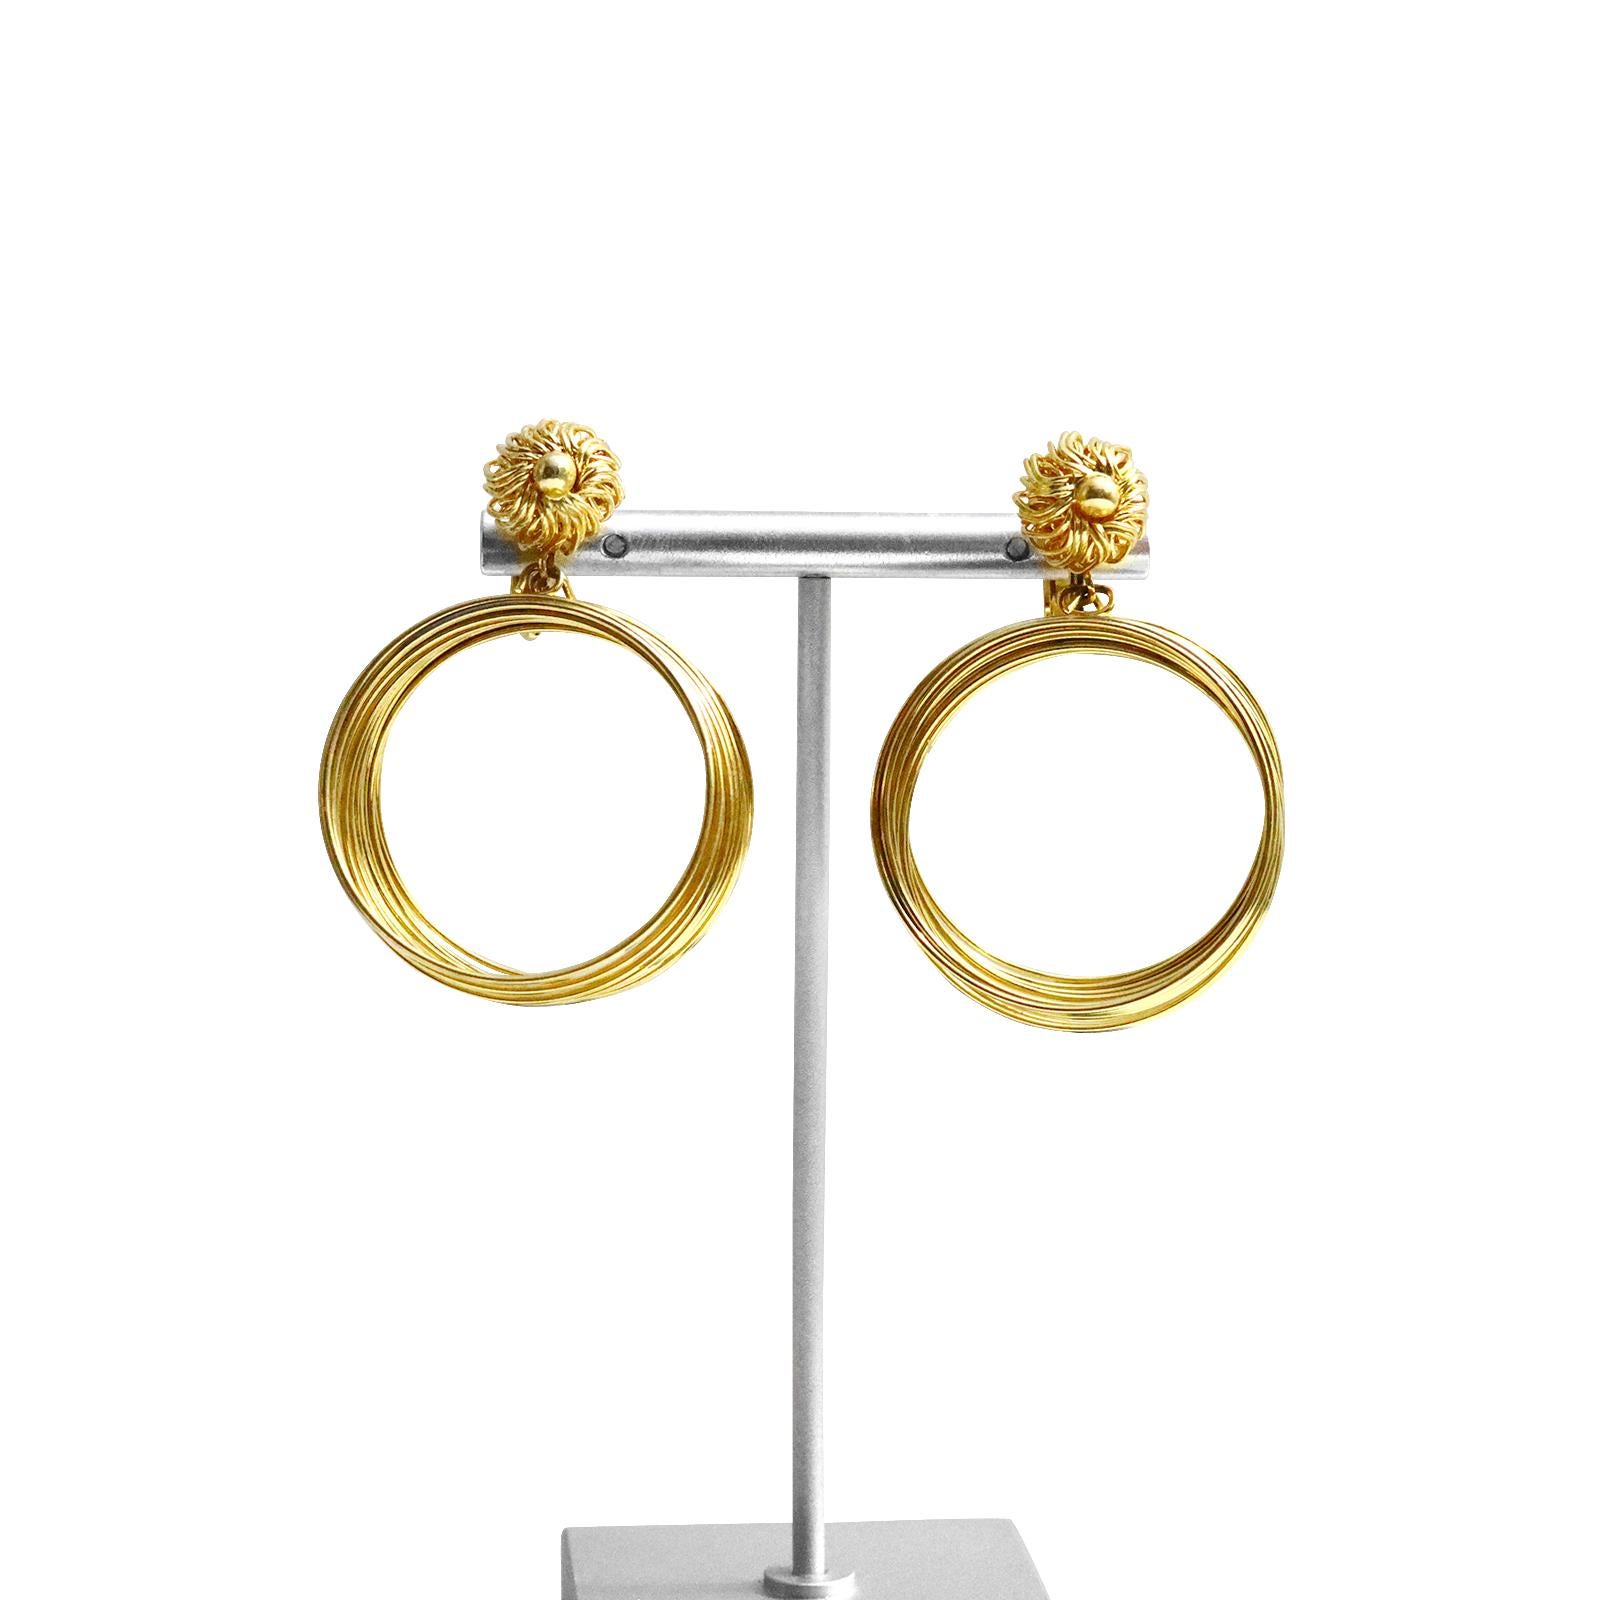 Vintage Vendome Slinky Dangling Hoop Earrings, circa 1980s In Good Condition For Sale In New York, NY